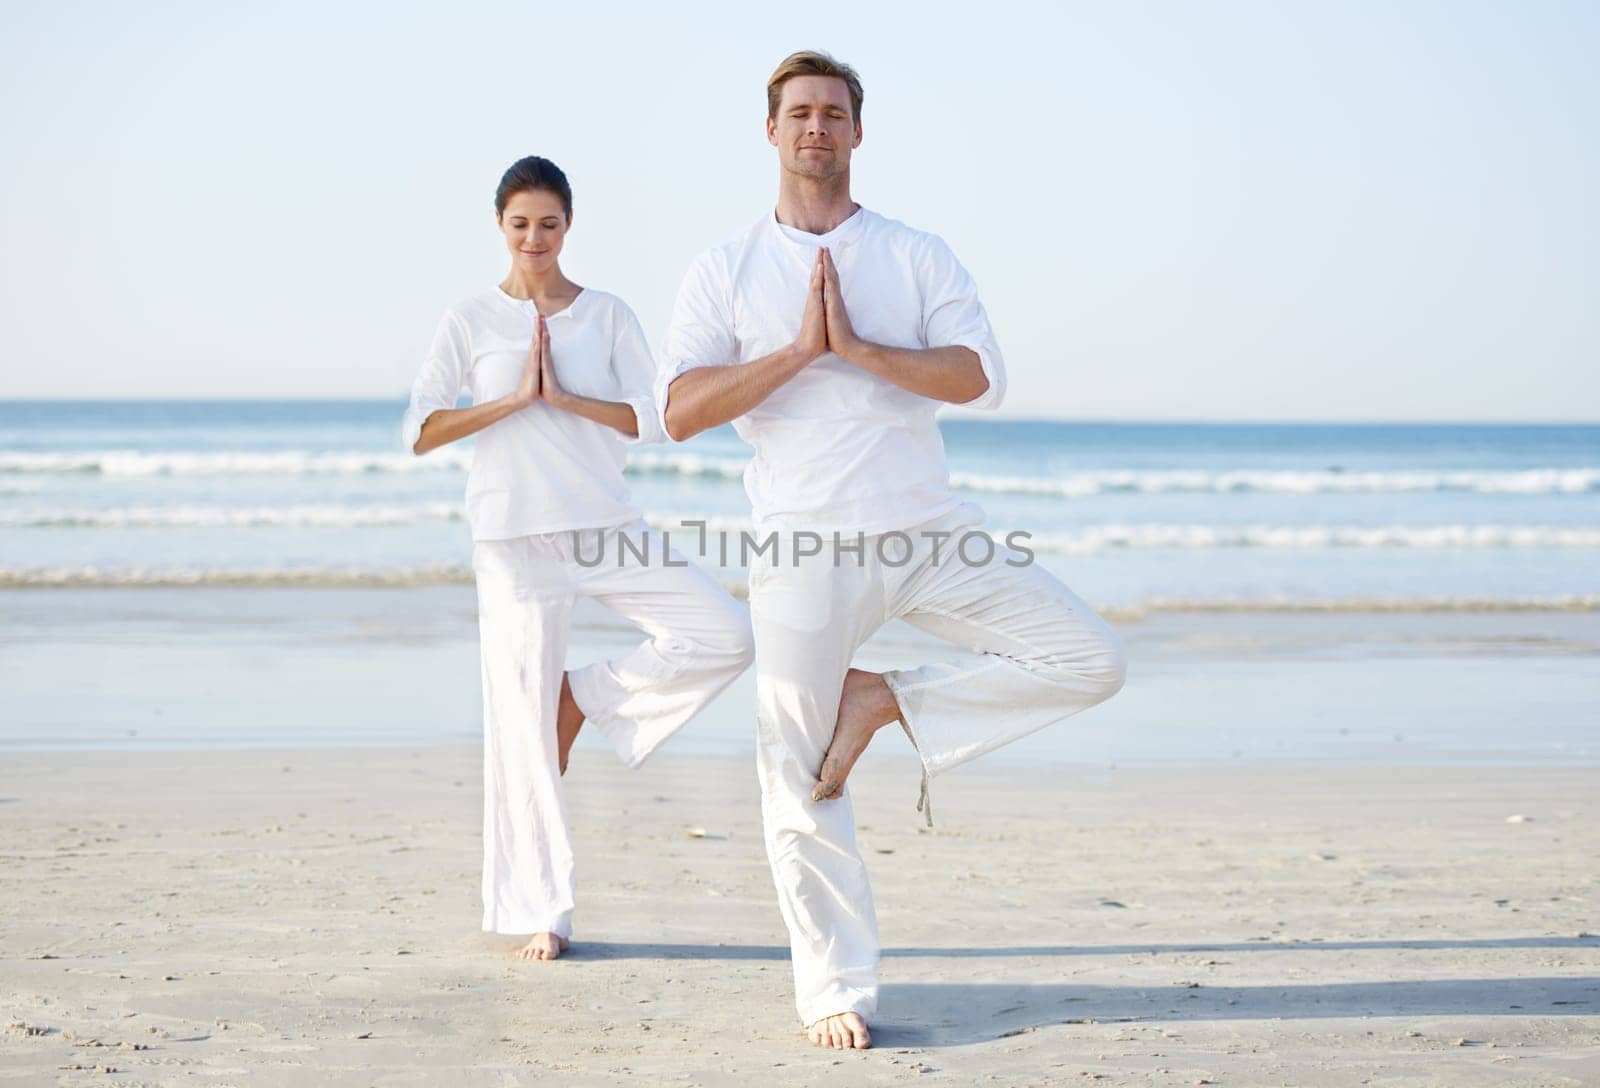 Couple, yoga and balance, meditation on beach for zen and wellness, travel and mindfulness with holistic healing. People outdoor, exercise and peace, workout together for bonding with sea and nature.